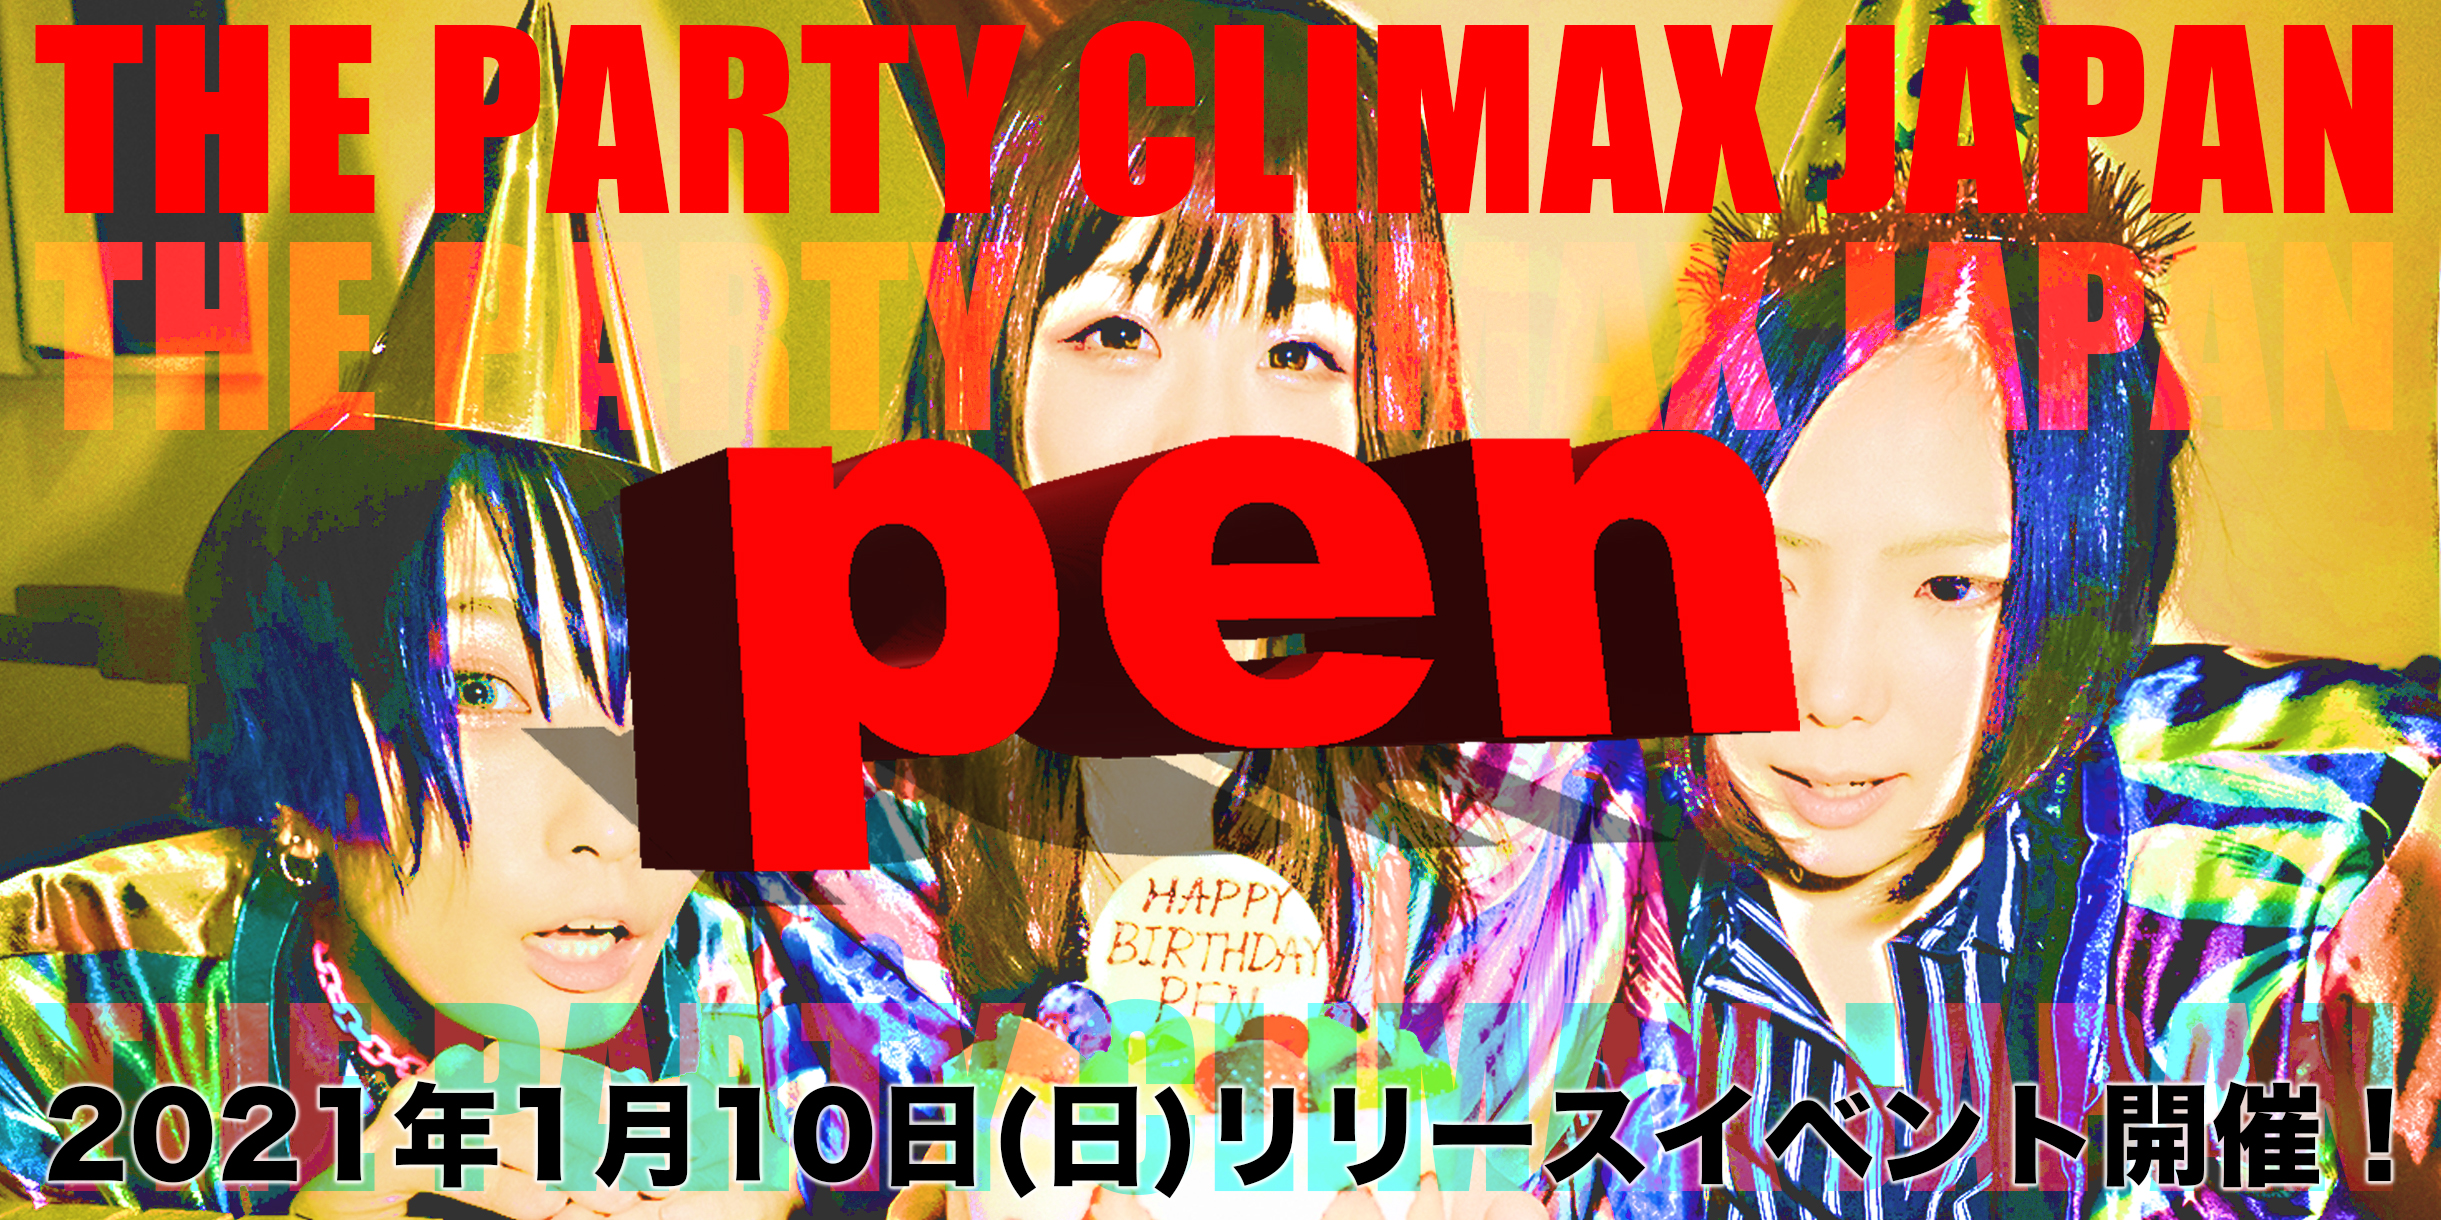 THE PARTY CLIMAX JAPAN「pen」リリースイベント